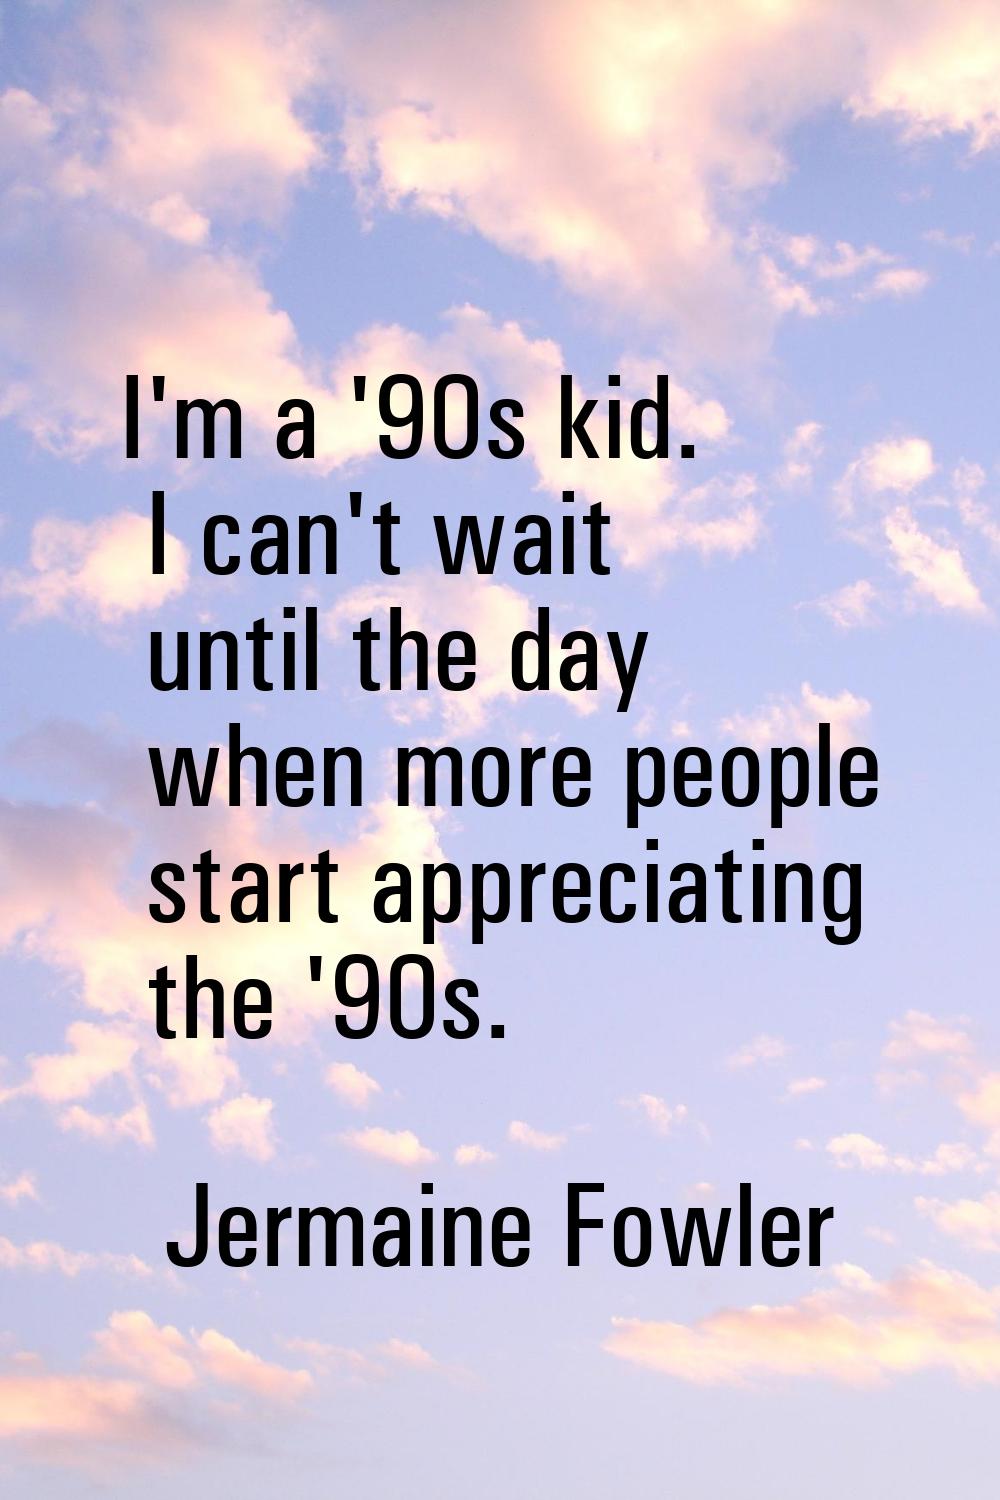 I'm a '90s kid. I can't wait until the day when more people start appreciating the '90s.